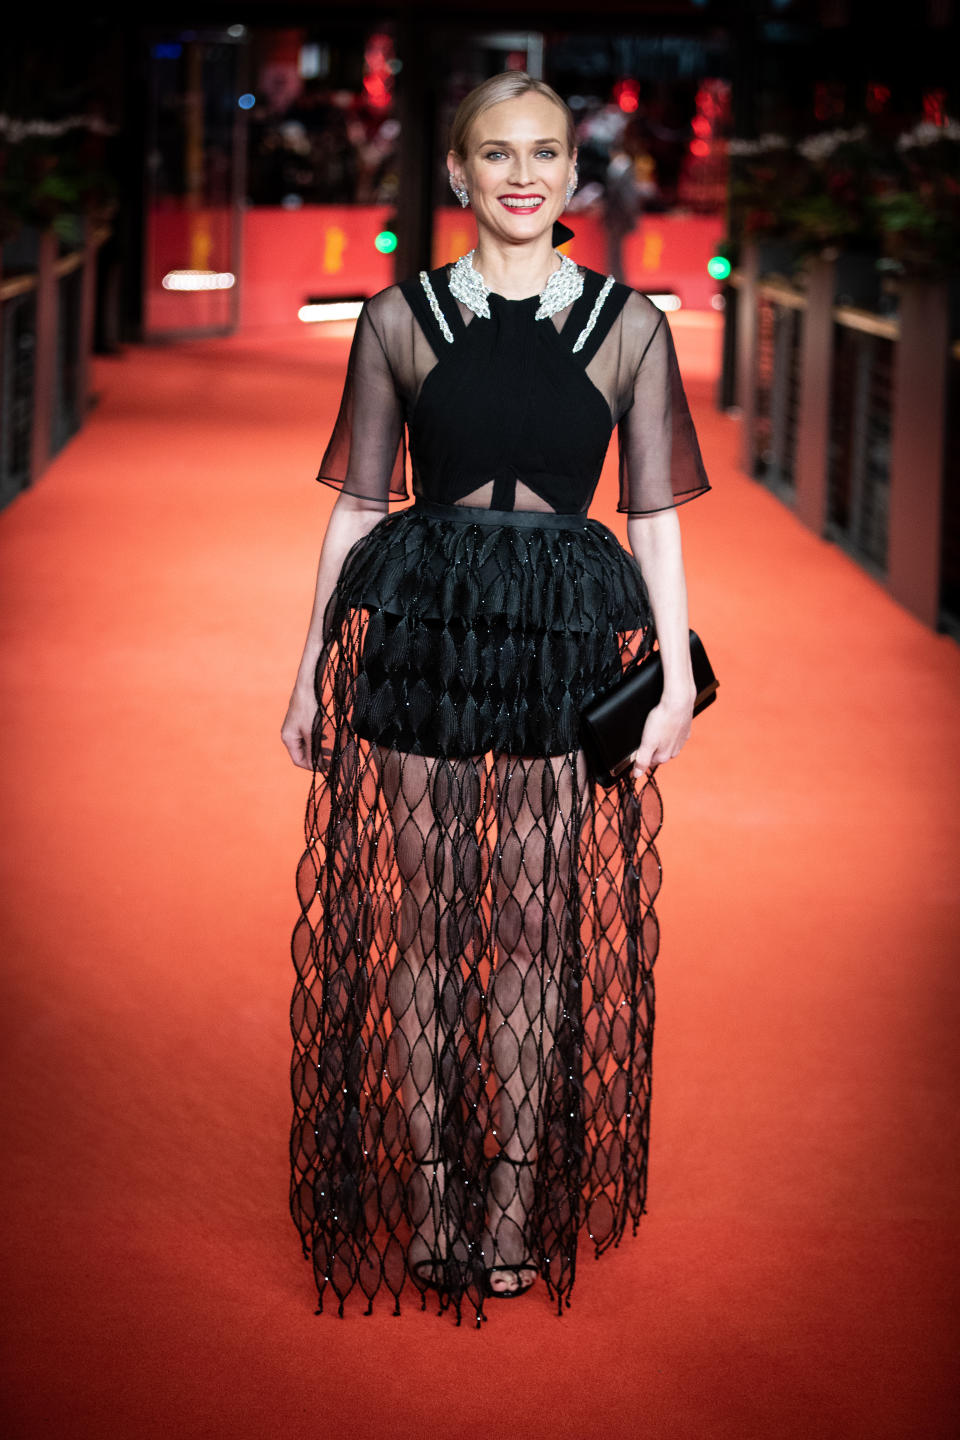 <p>Diane Kruger wore a black mesh dress by Givenchy on the red carpet for the premiere of ‘The Operative’, which took place during the 69th Berlinale Film Festival in Berlin. <em>[Photo: Getty]</em> </p>